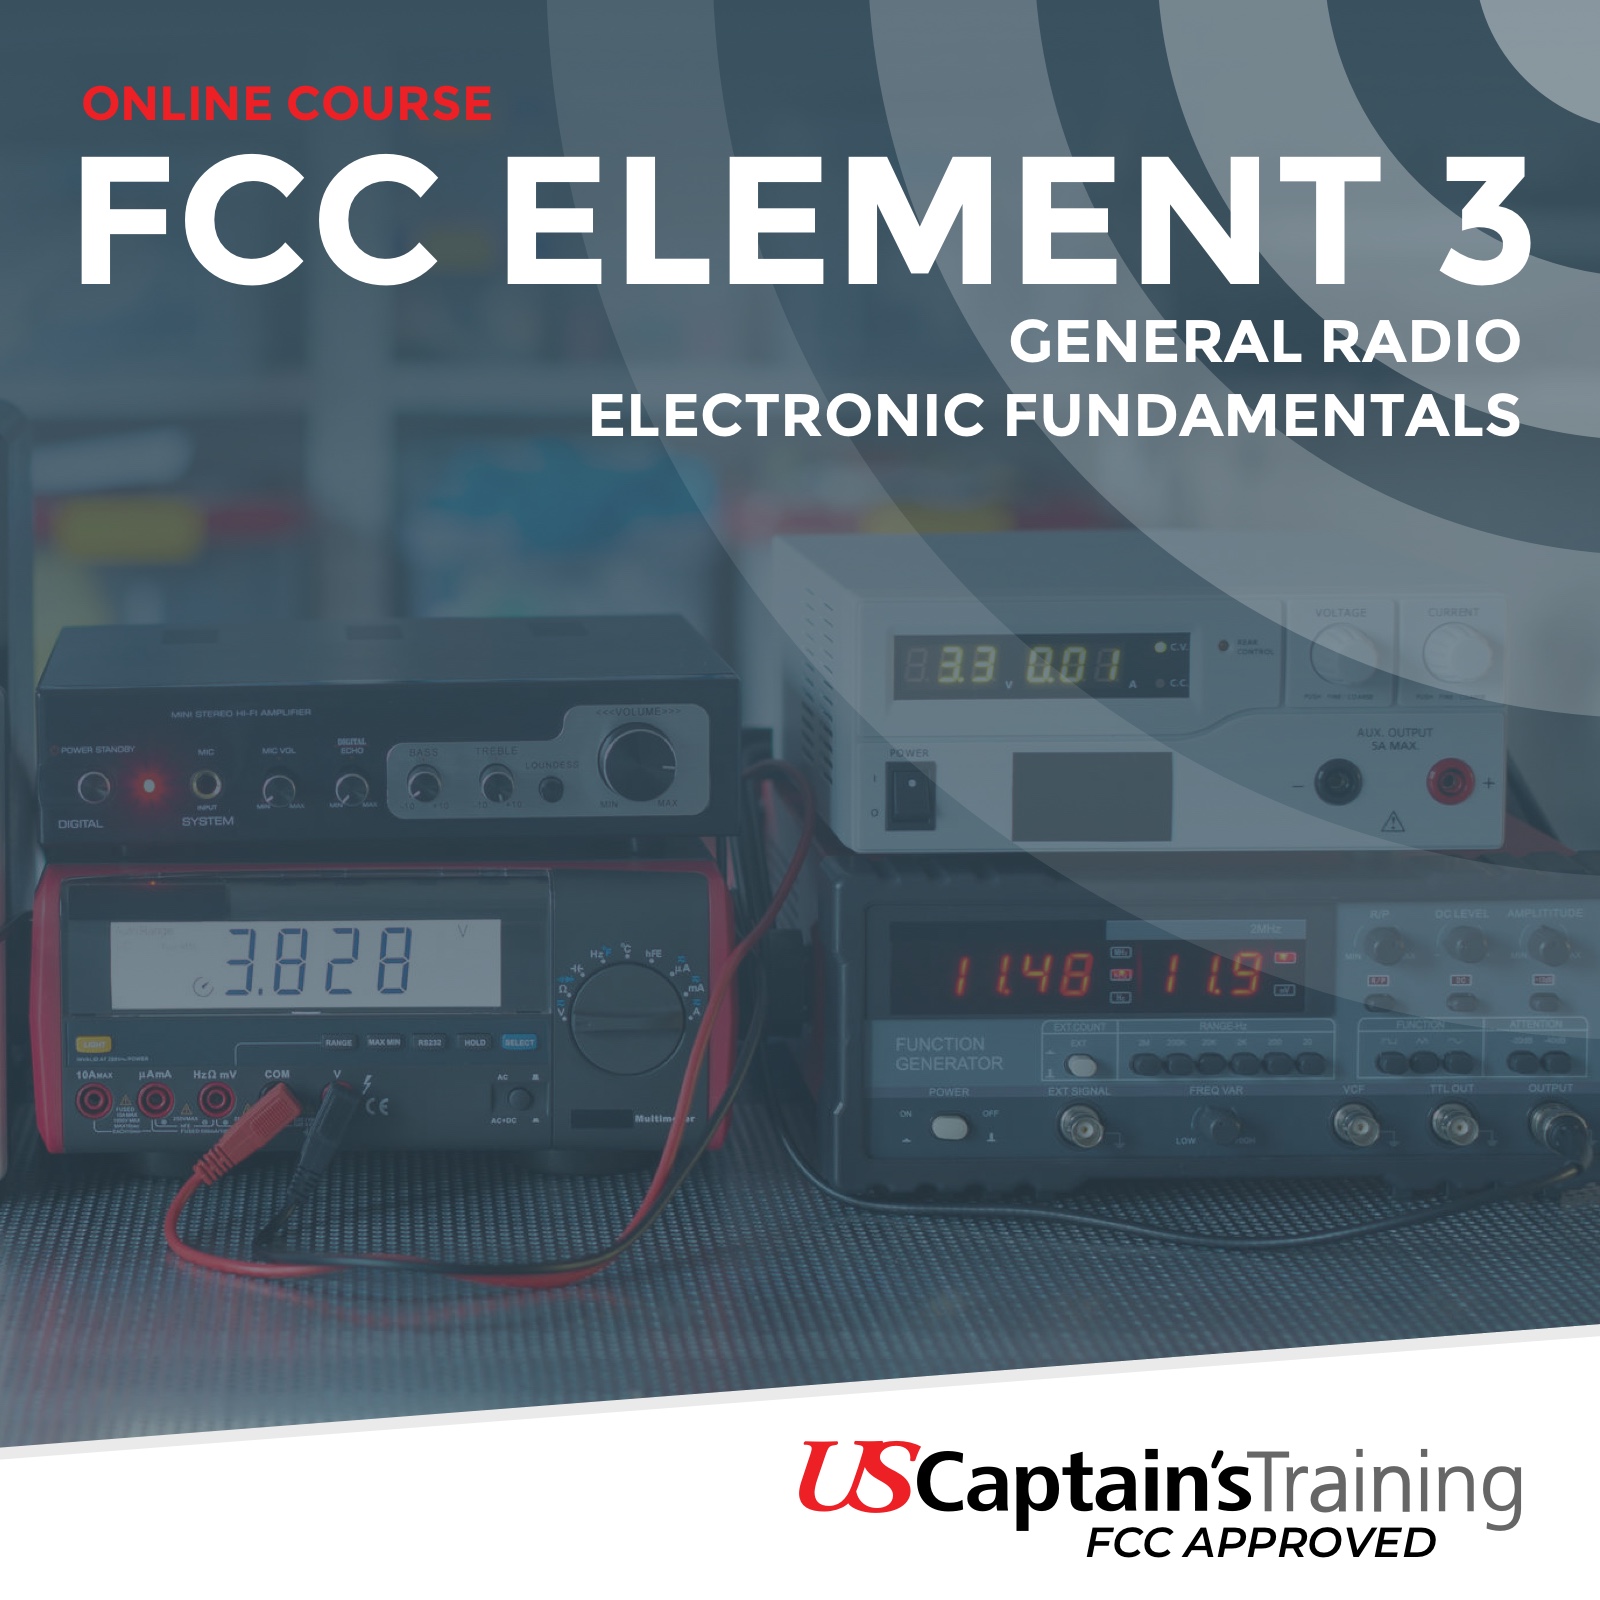 FCC Element 3 - General Radio Electronic Fundamentals - Proctored by US Captain's Training